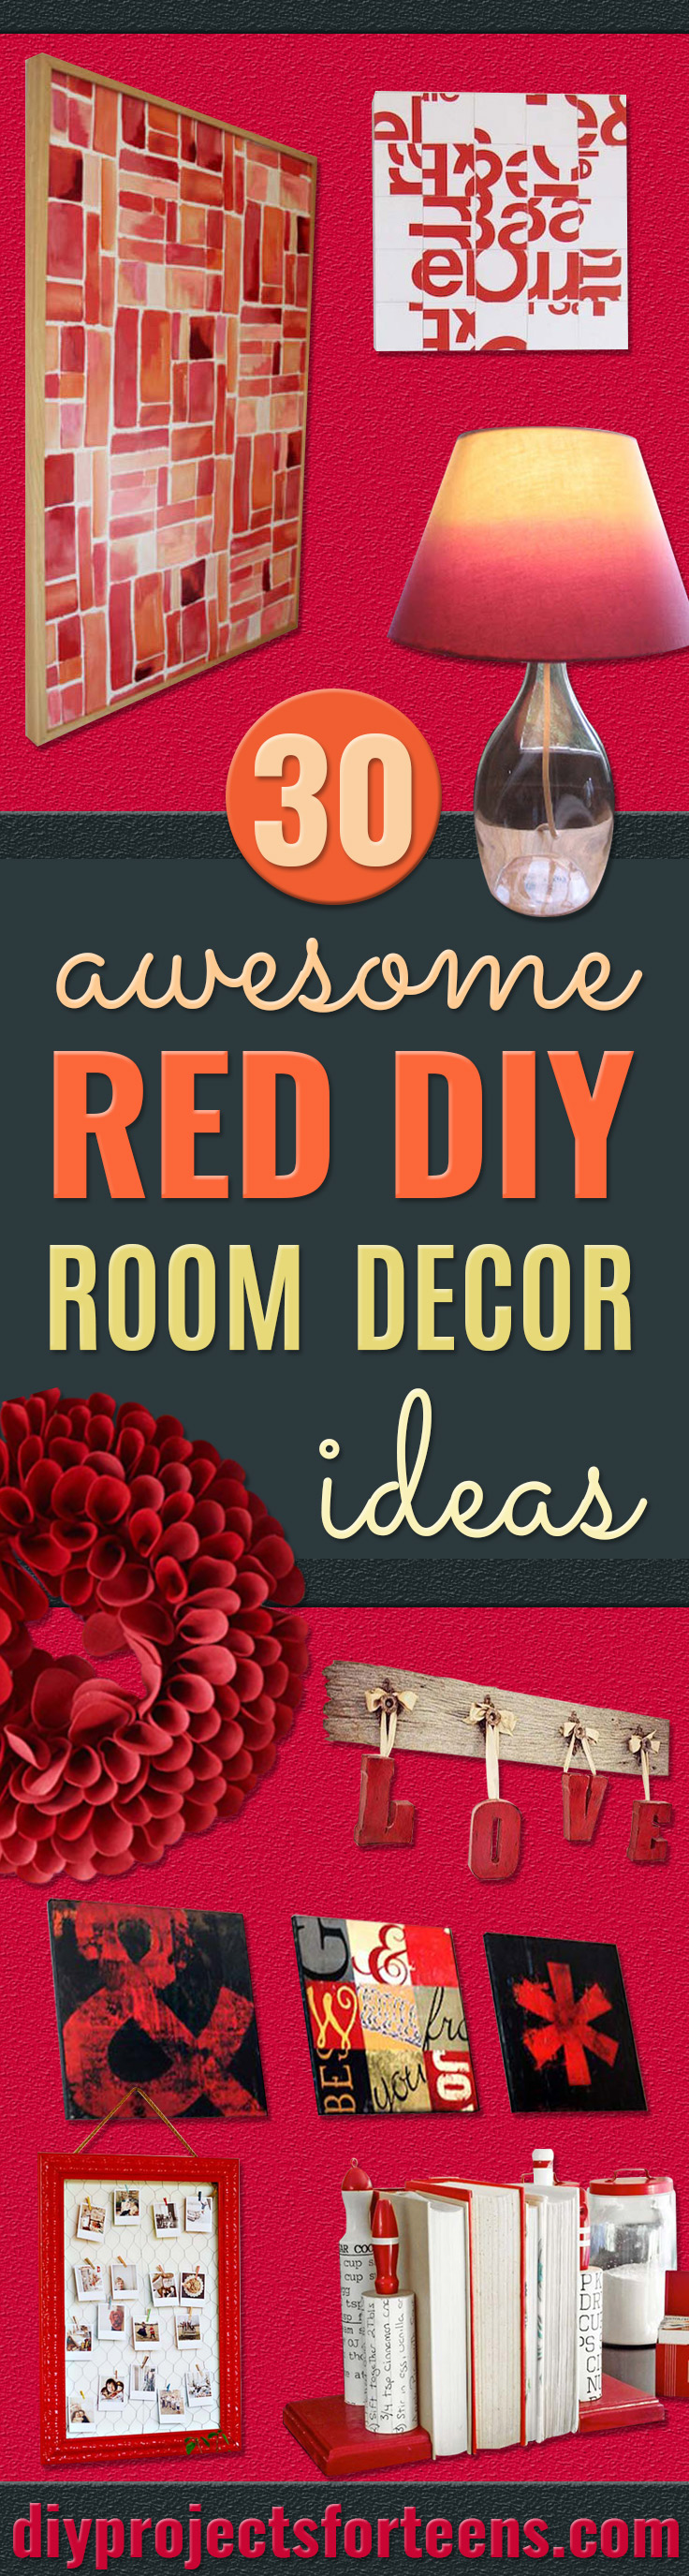 Cool DIY Room Decor Ideas in Red - Creative Home Decor, Wall Art and Bedroom Crafts to Accent Your Red Room - Creative Craft Projects and Quick Arts and Crafts Ideas for Teens and Adults - Easy Ways To Decorate on A Budget 